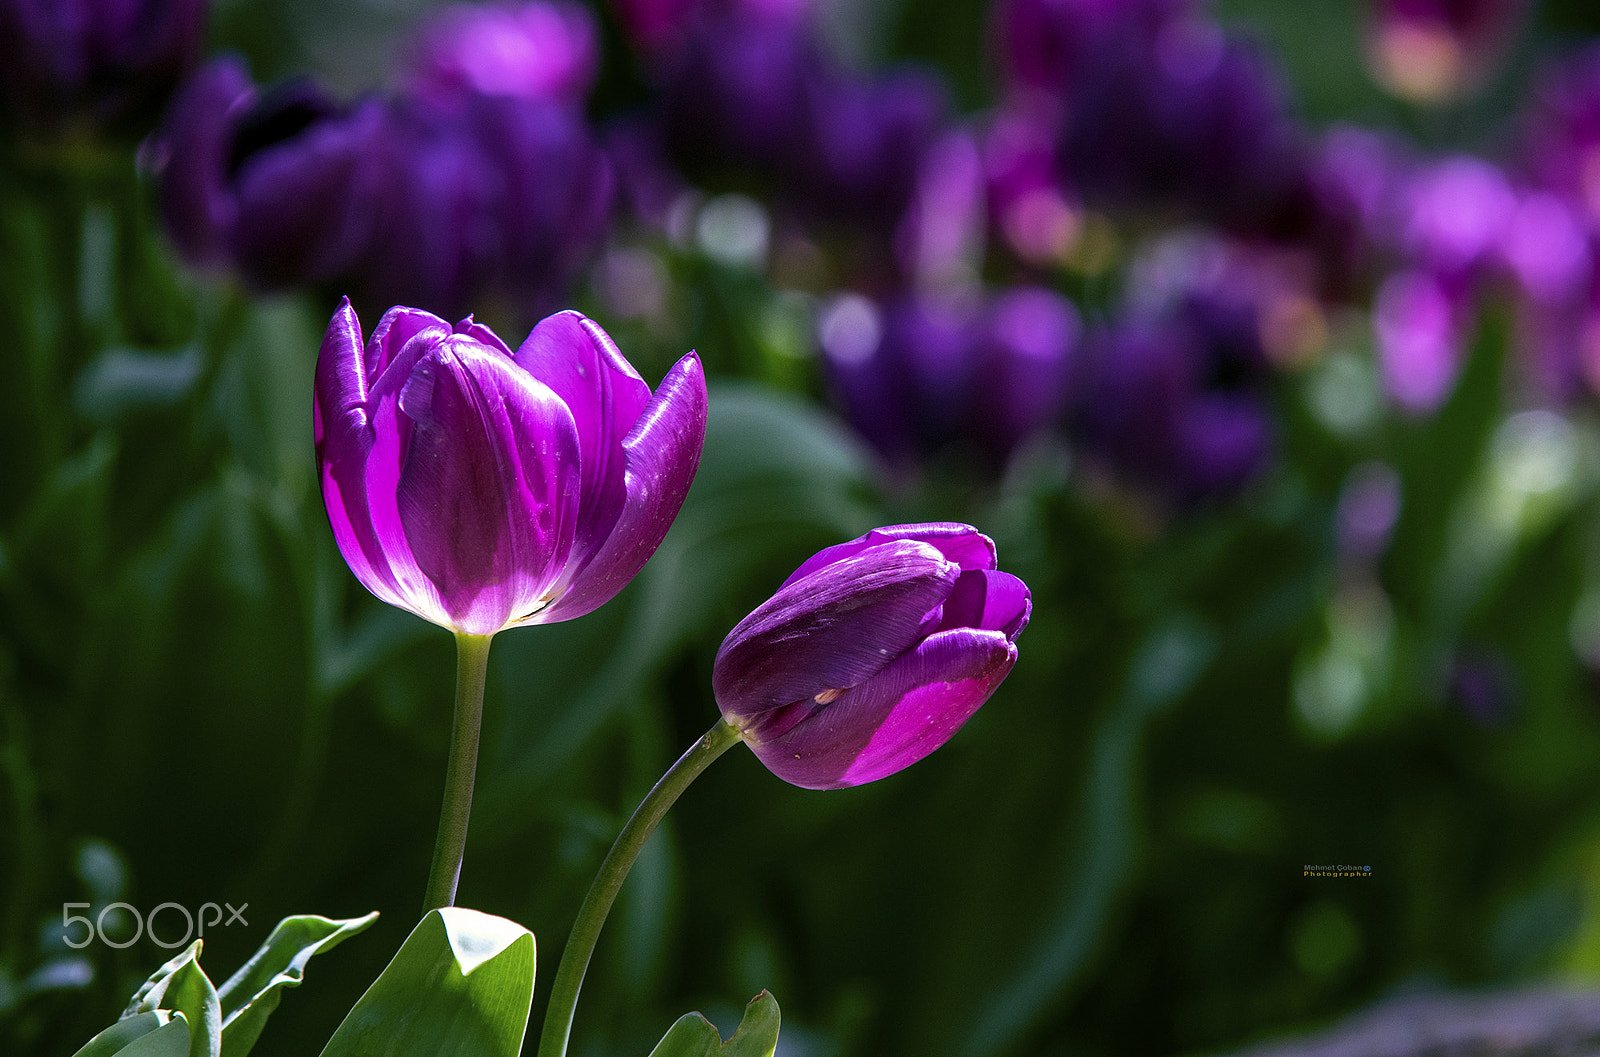 Pentax K-3 II sample photo. A pair of tulips photography